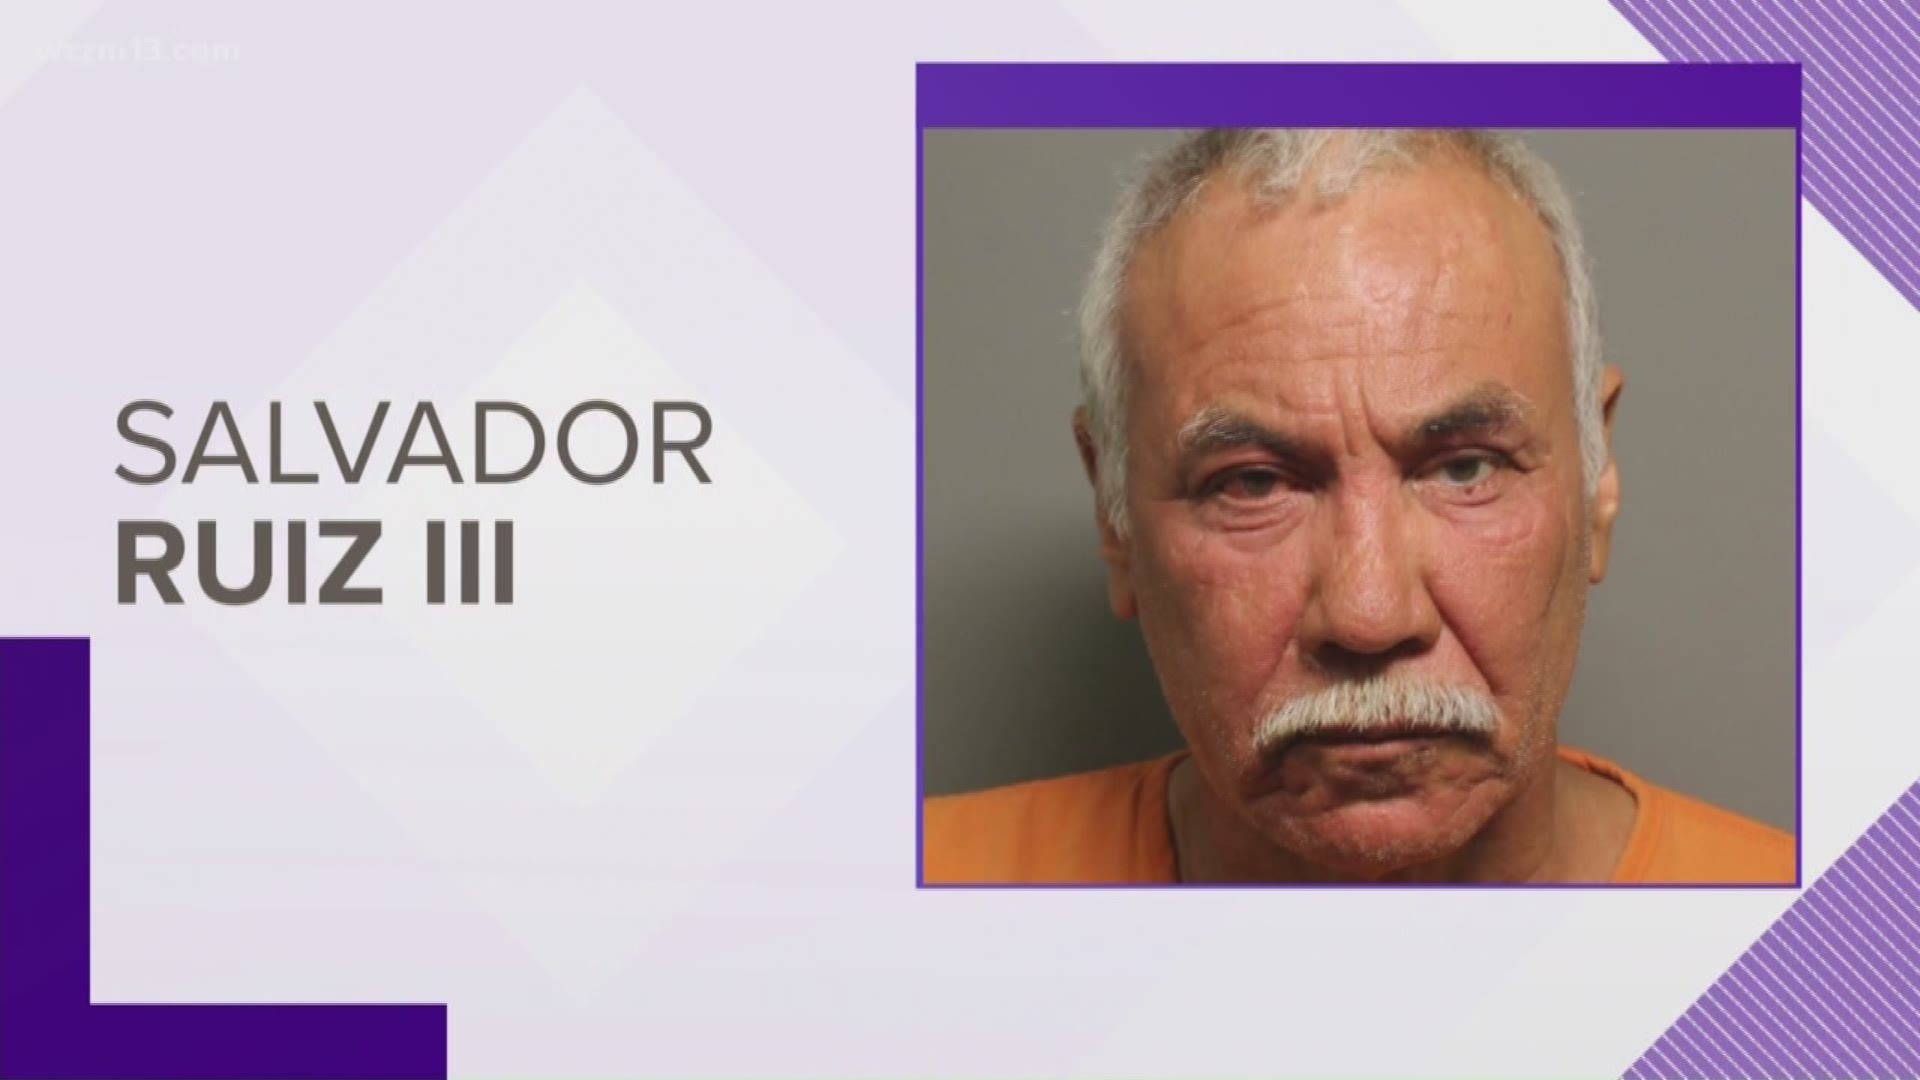 A Holland man officially faces charges in the death of his ex-girlfriend. Police believe Salvador Ruiz broke in through her sliding glass door and stabbed her multiple times.